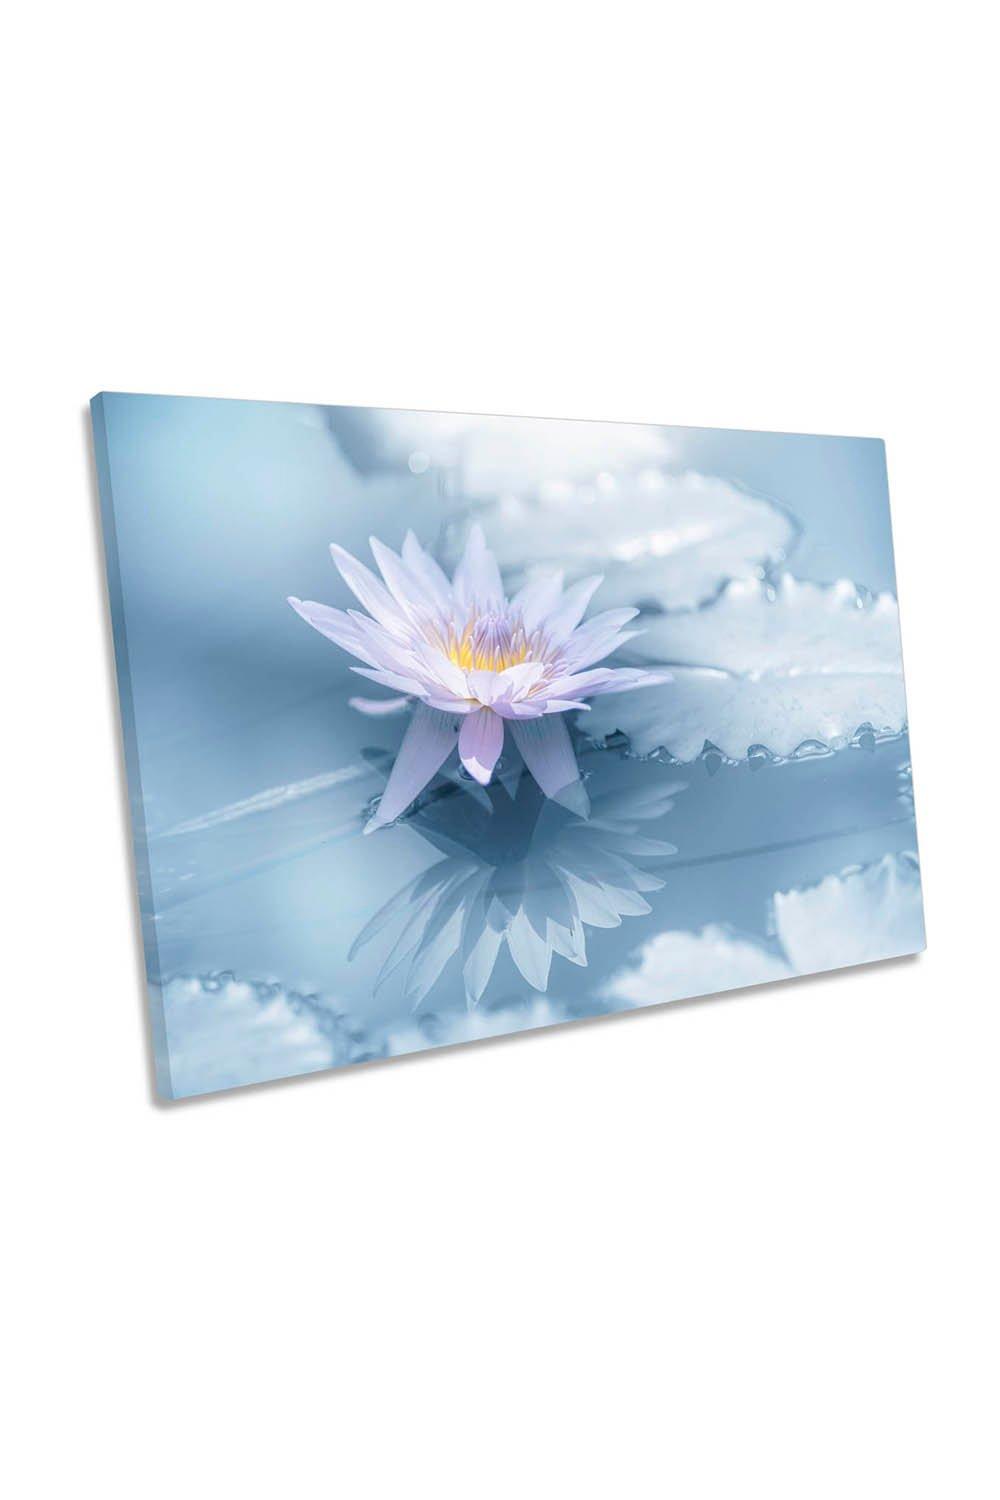 Reflection Still Calm Lilly Blue Peace Floral Canvas Wall Art Picture Print